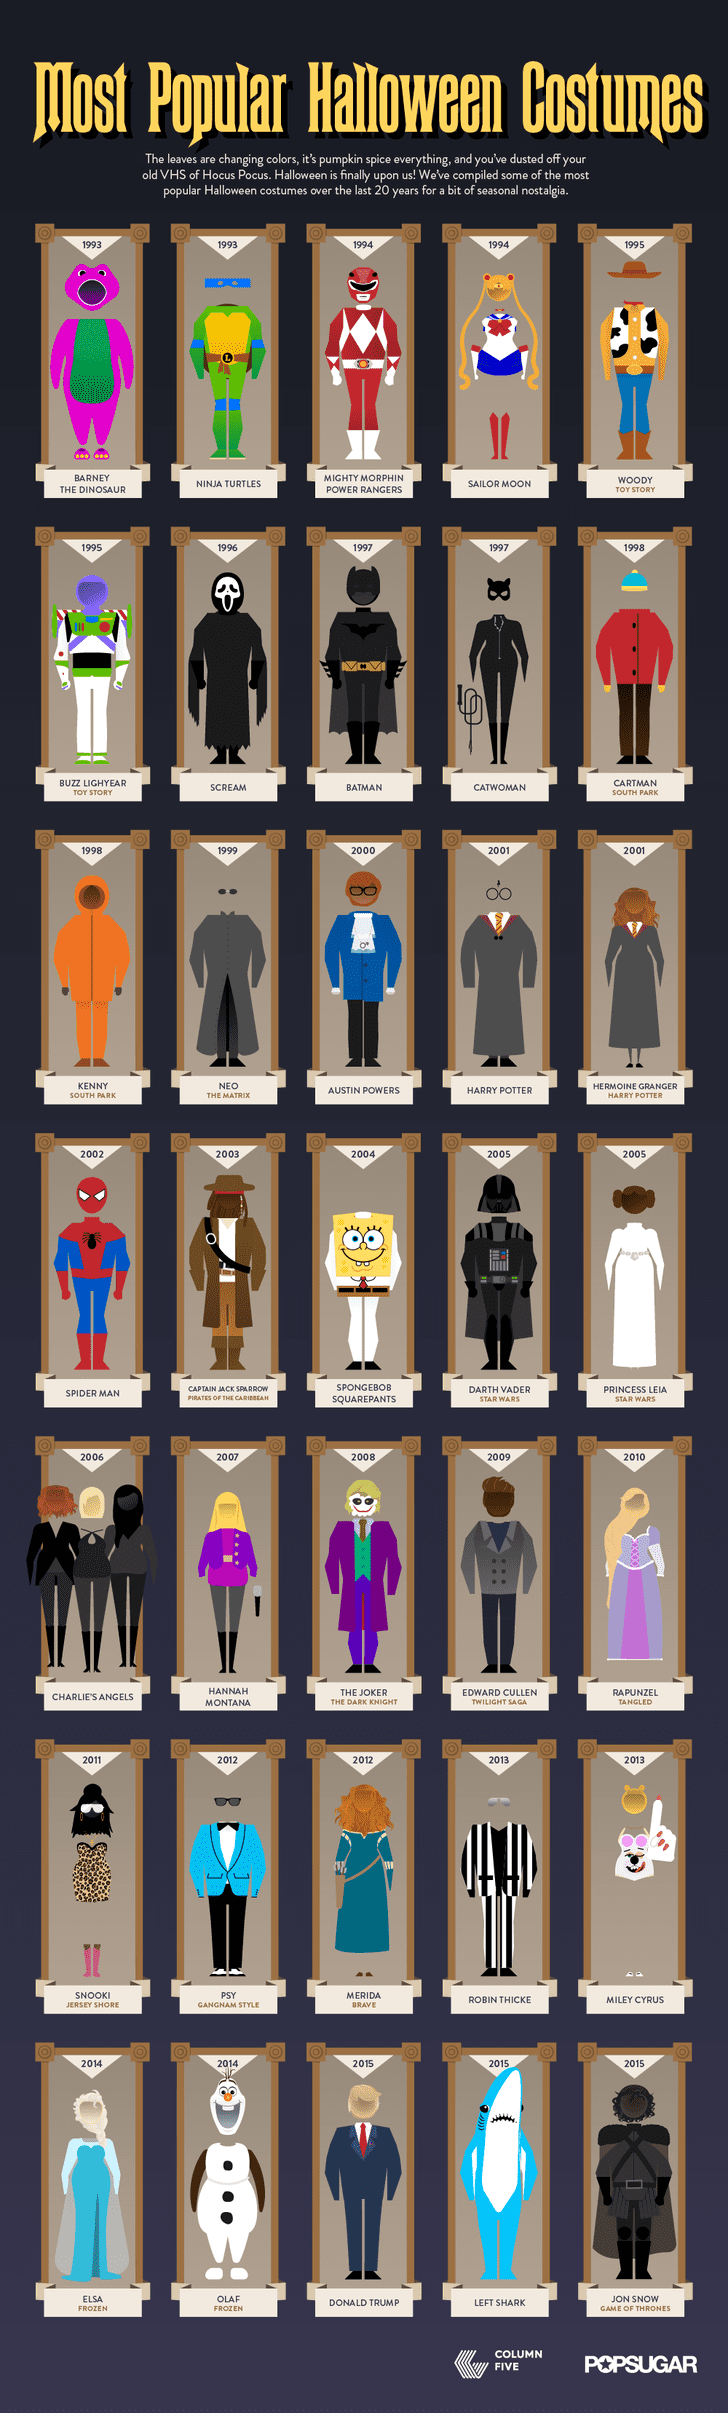 Popular Halloween Costumes by Year